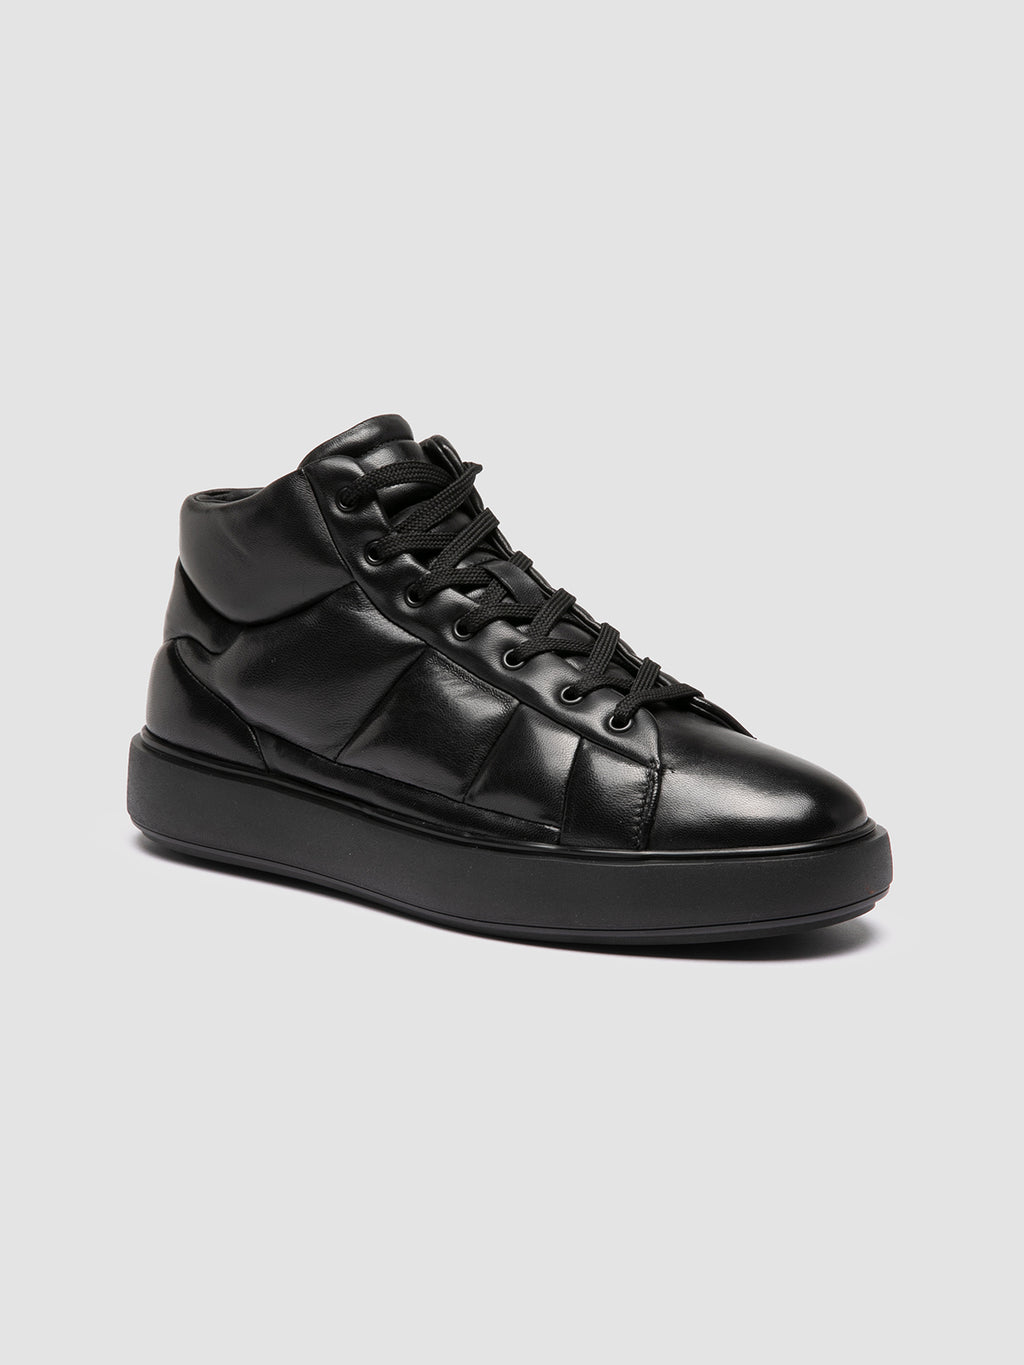 LEISURE 002 - Black Leather High Top Sneakers